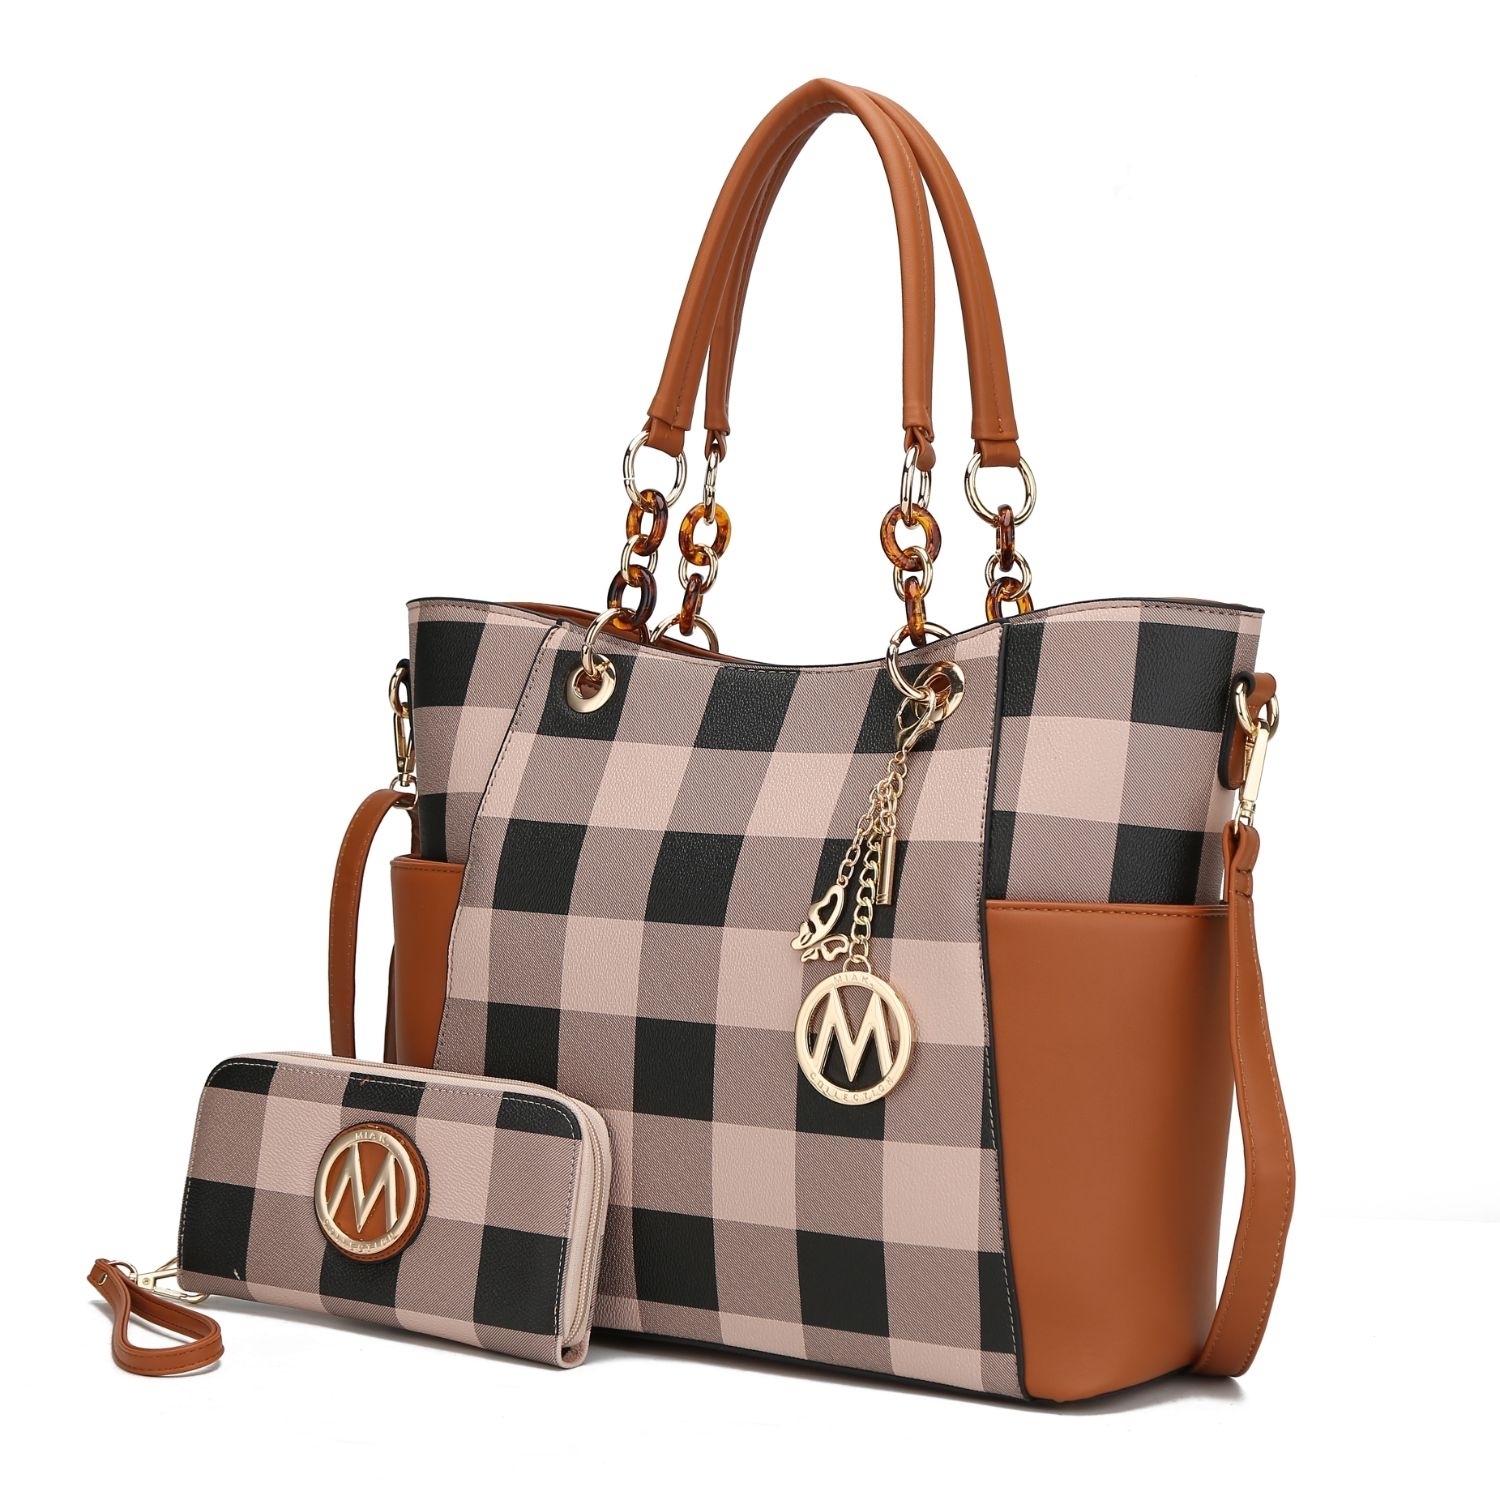 Bonita Checkered Tote 2 Pcs Wome's Large Handbag With Wallet And Decorative M Keychain By Mia K. - Olive